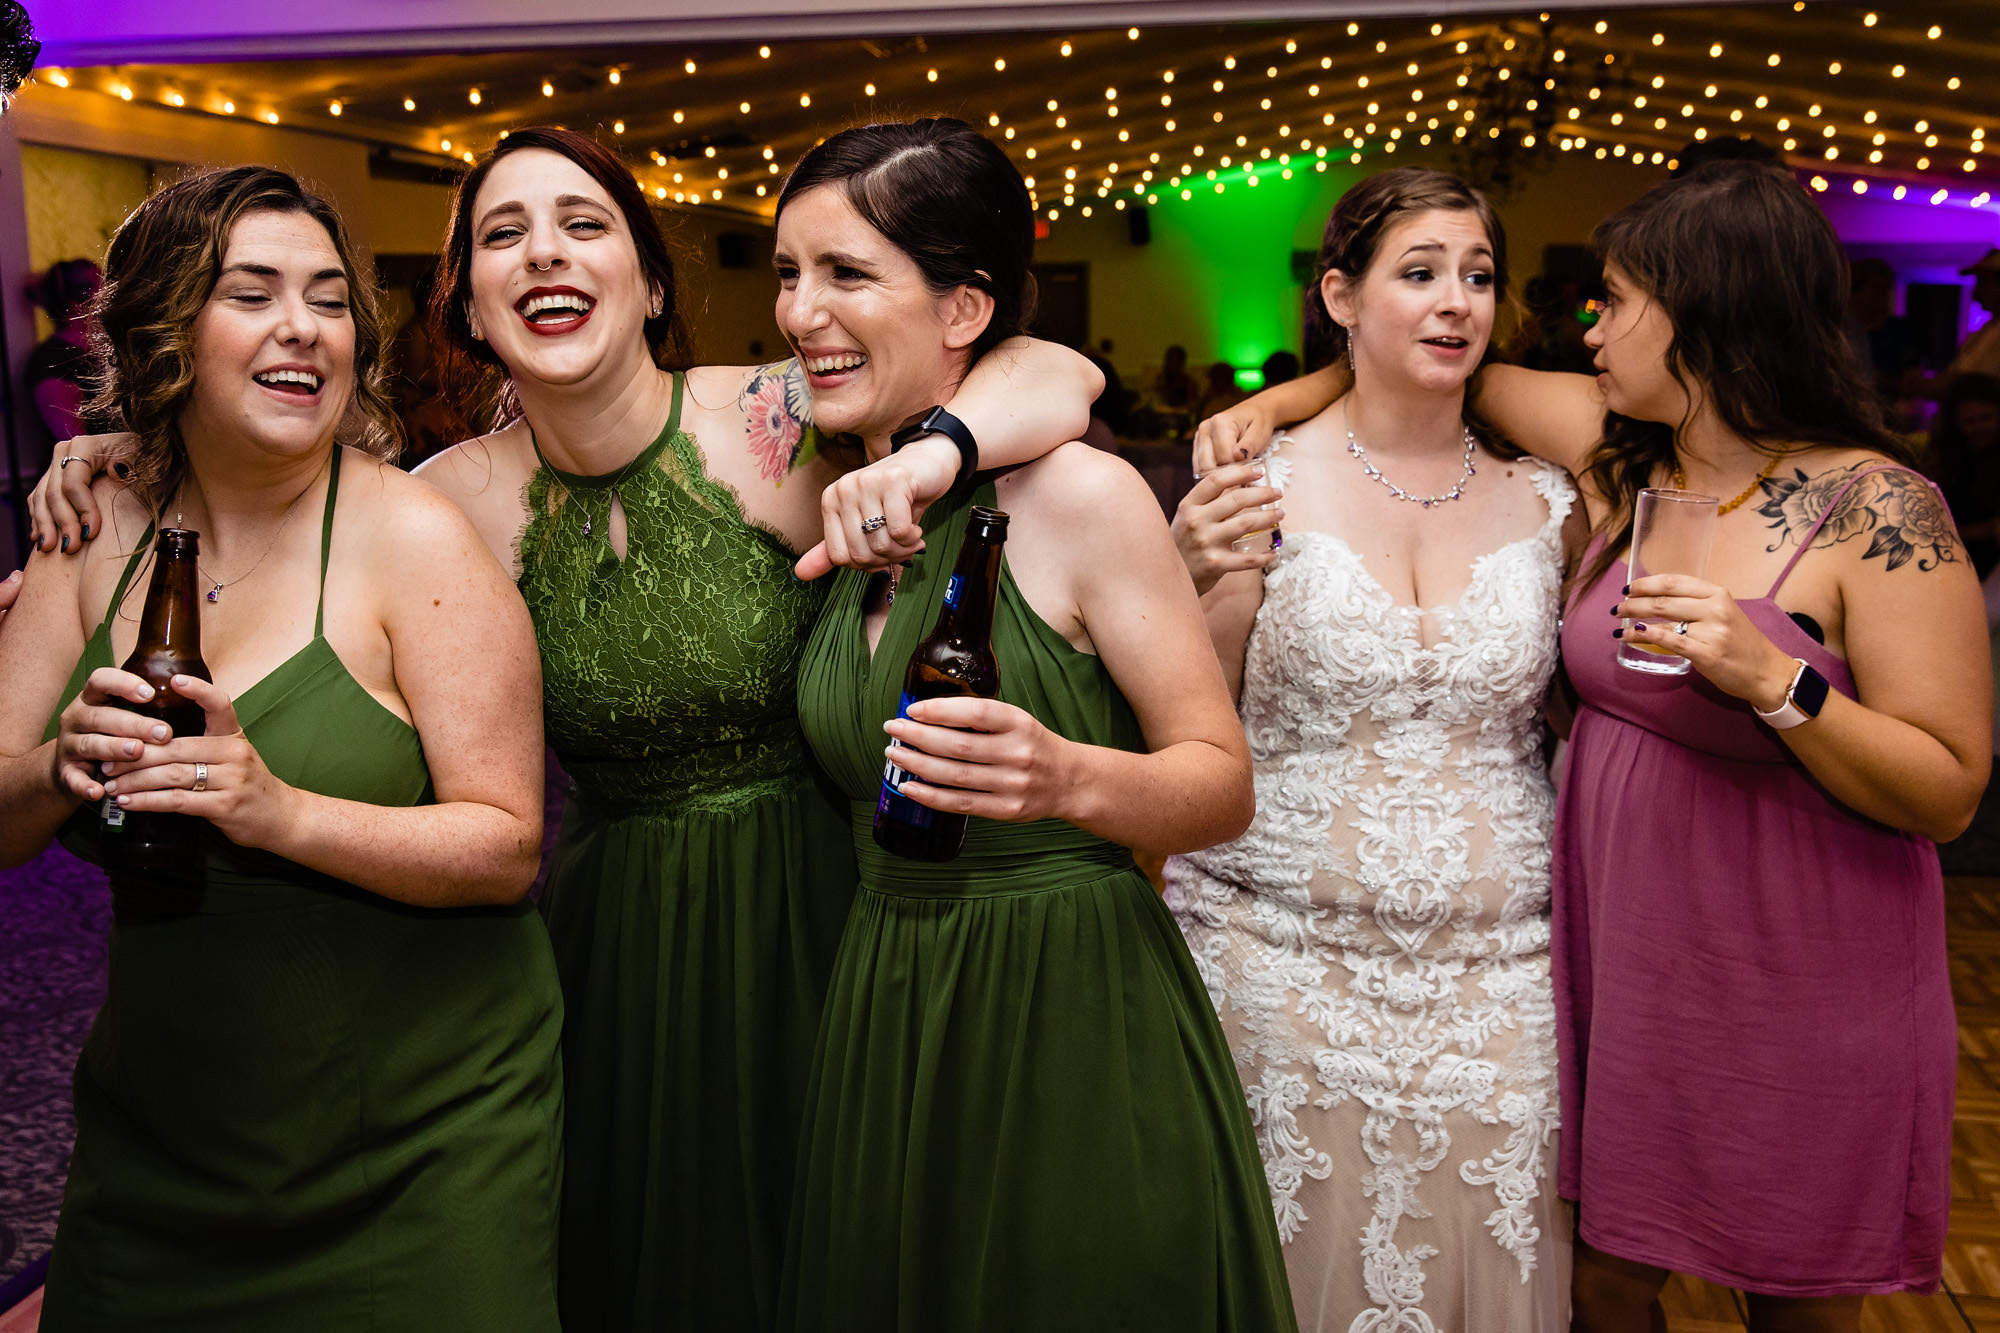 An emotional and fun wedding reception at Atlantic Oceanside in Bar Harbor, Maine